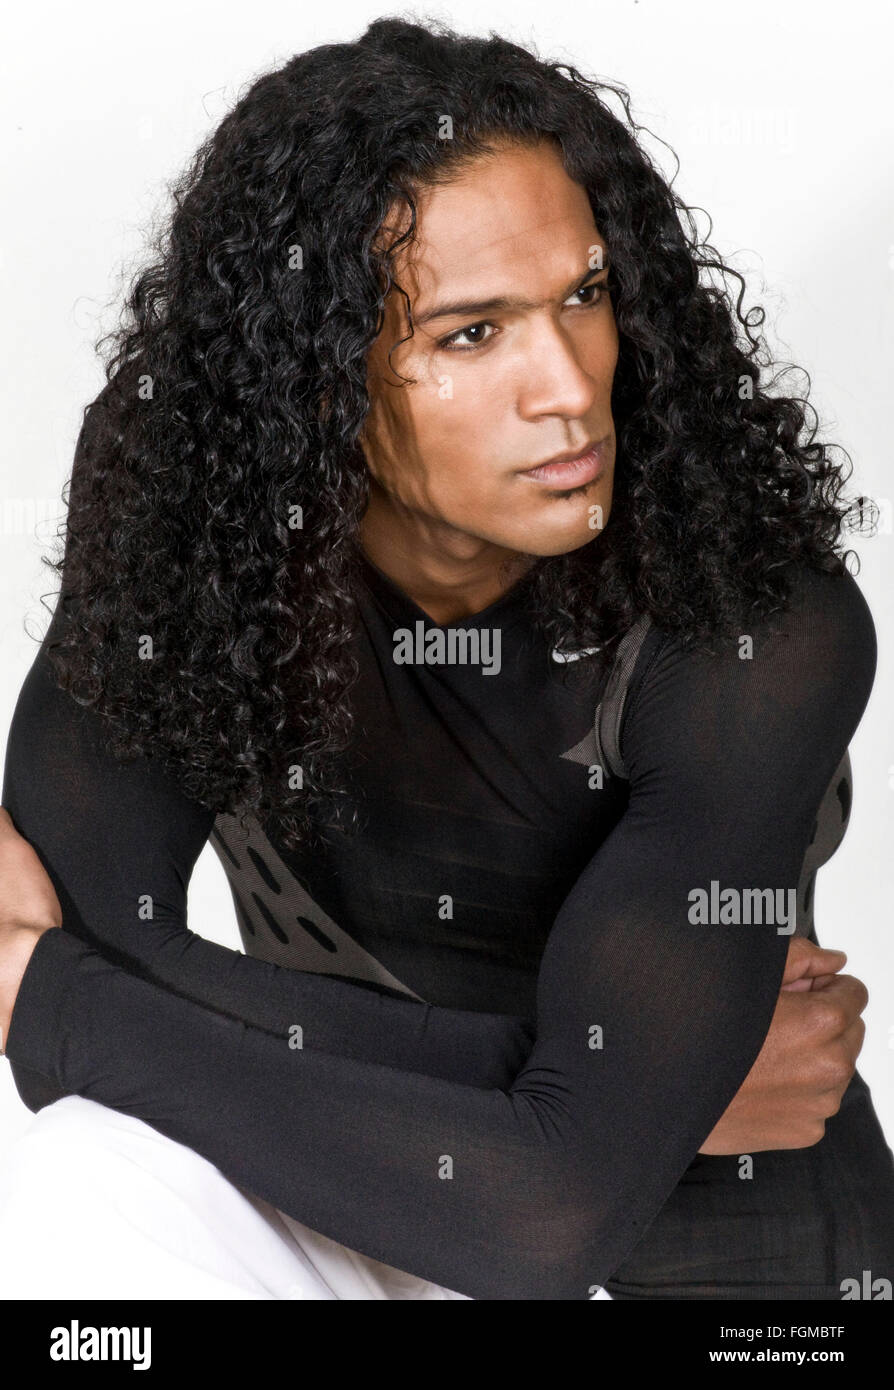 Handsome Young Black Man With Long Curly Hair Stock Photo